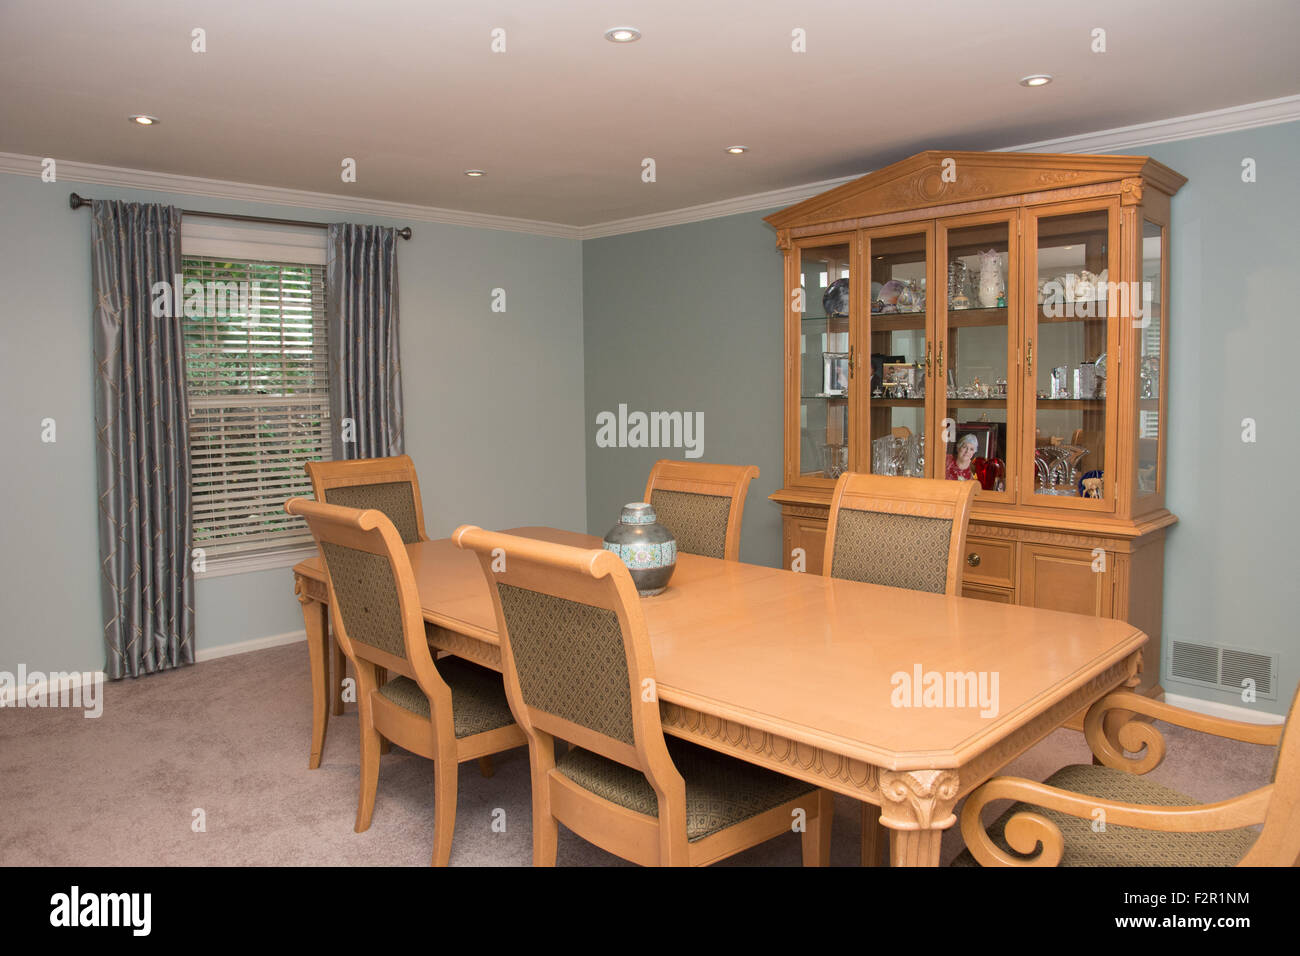 Dining room interior with a large wooden table, chairs, and china cabinet. Stock Photo